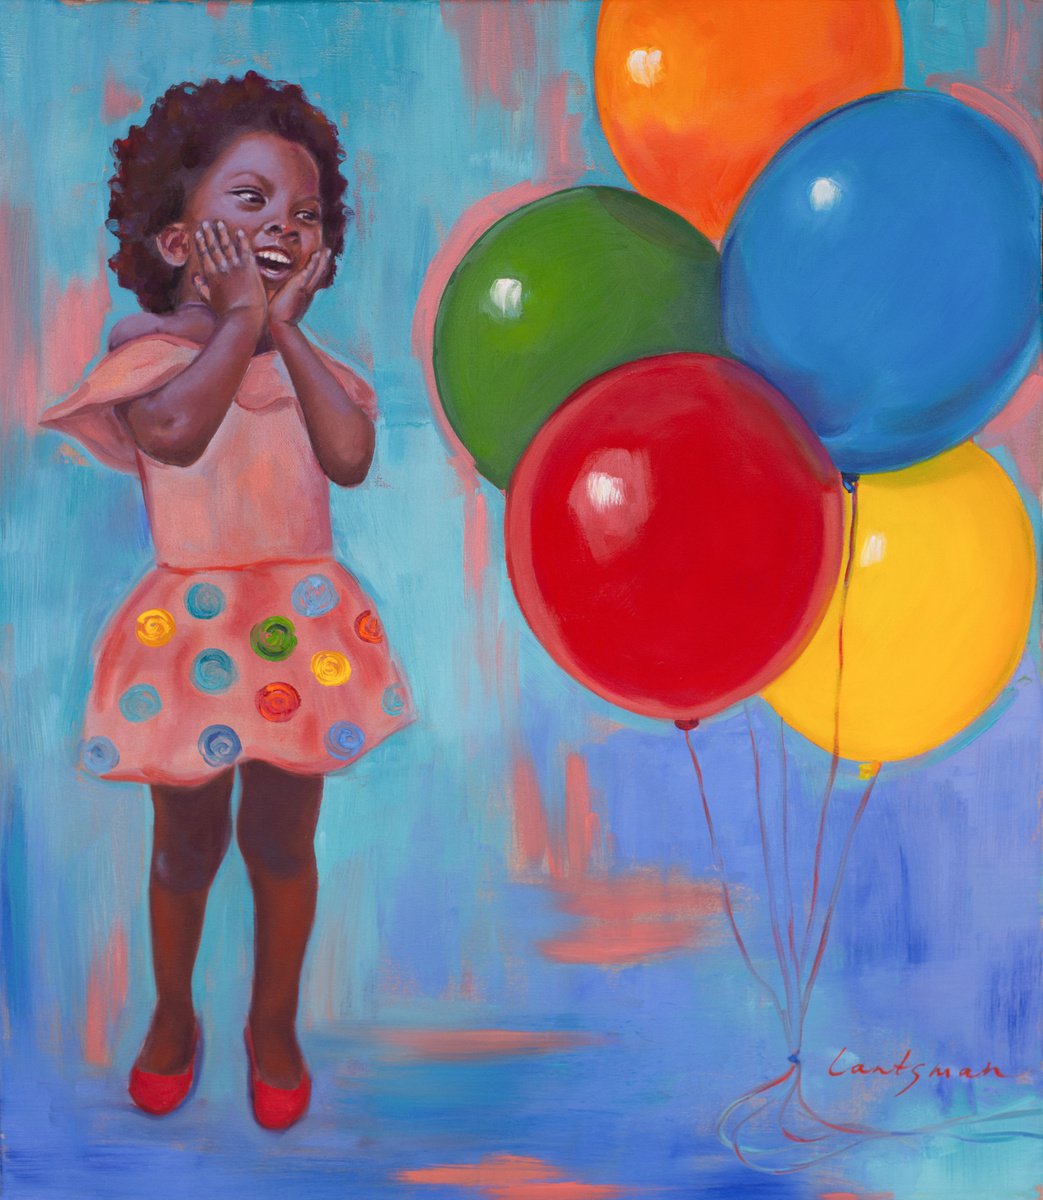 Pure joy - Girl with colorful balloons by Jane Lantsman